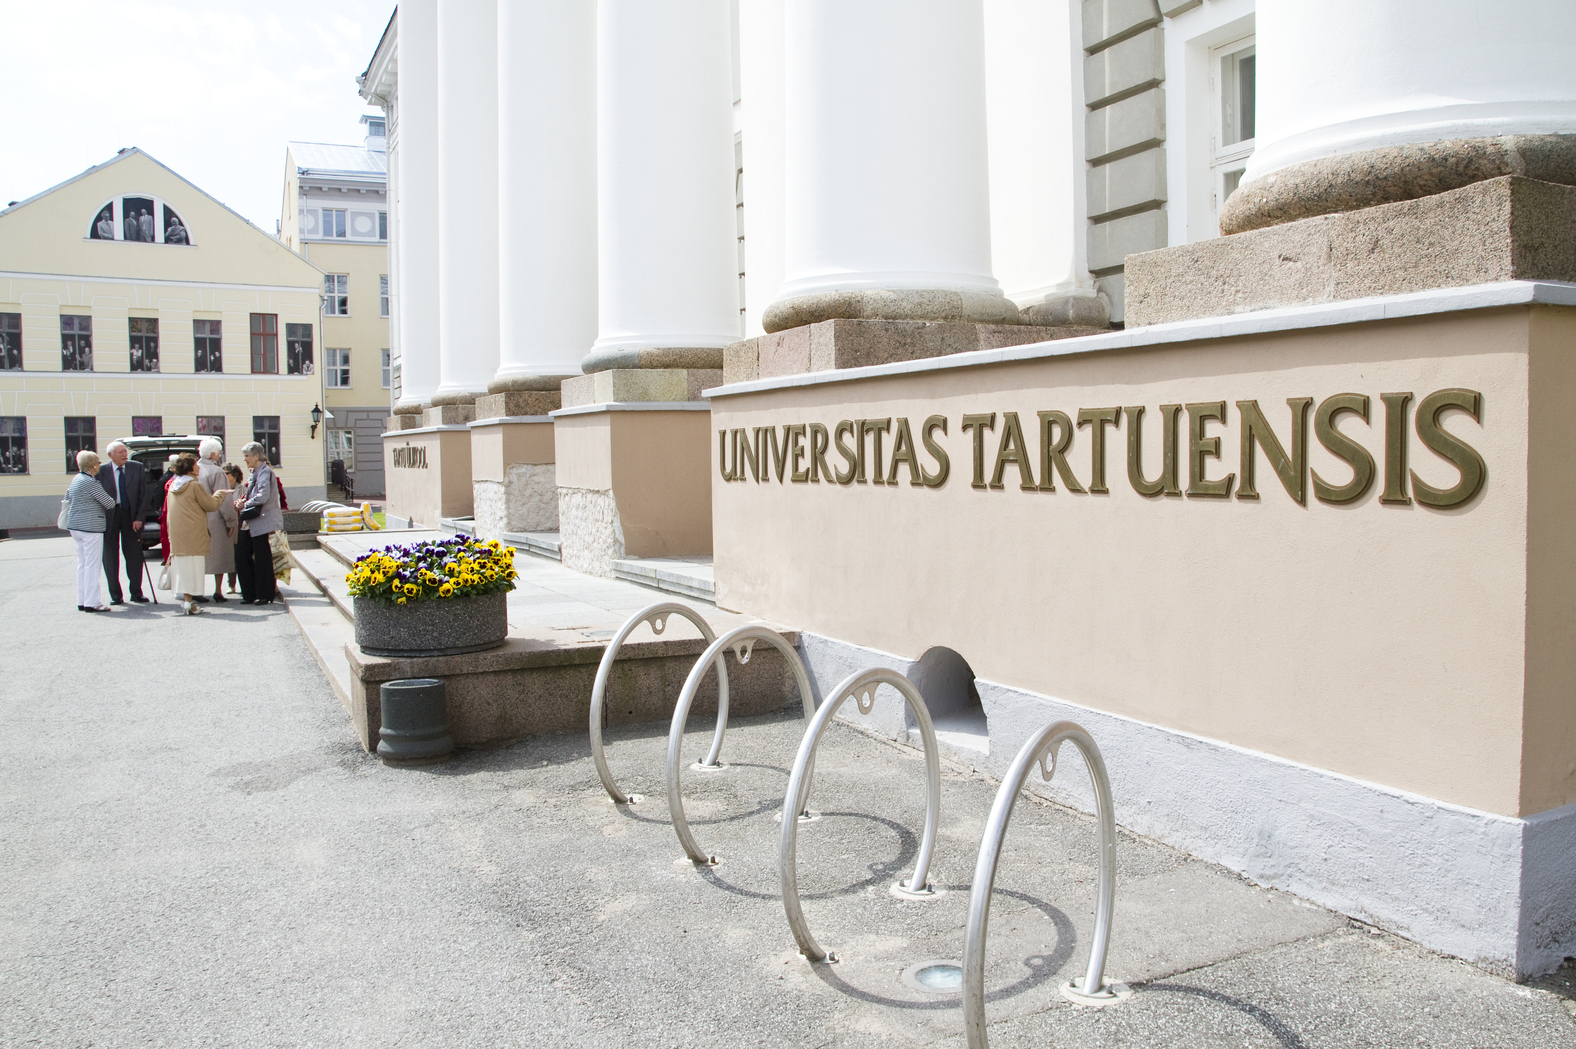 Find yourself at home in Tartu